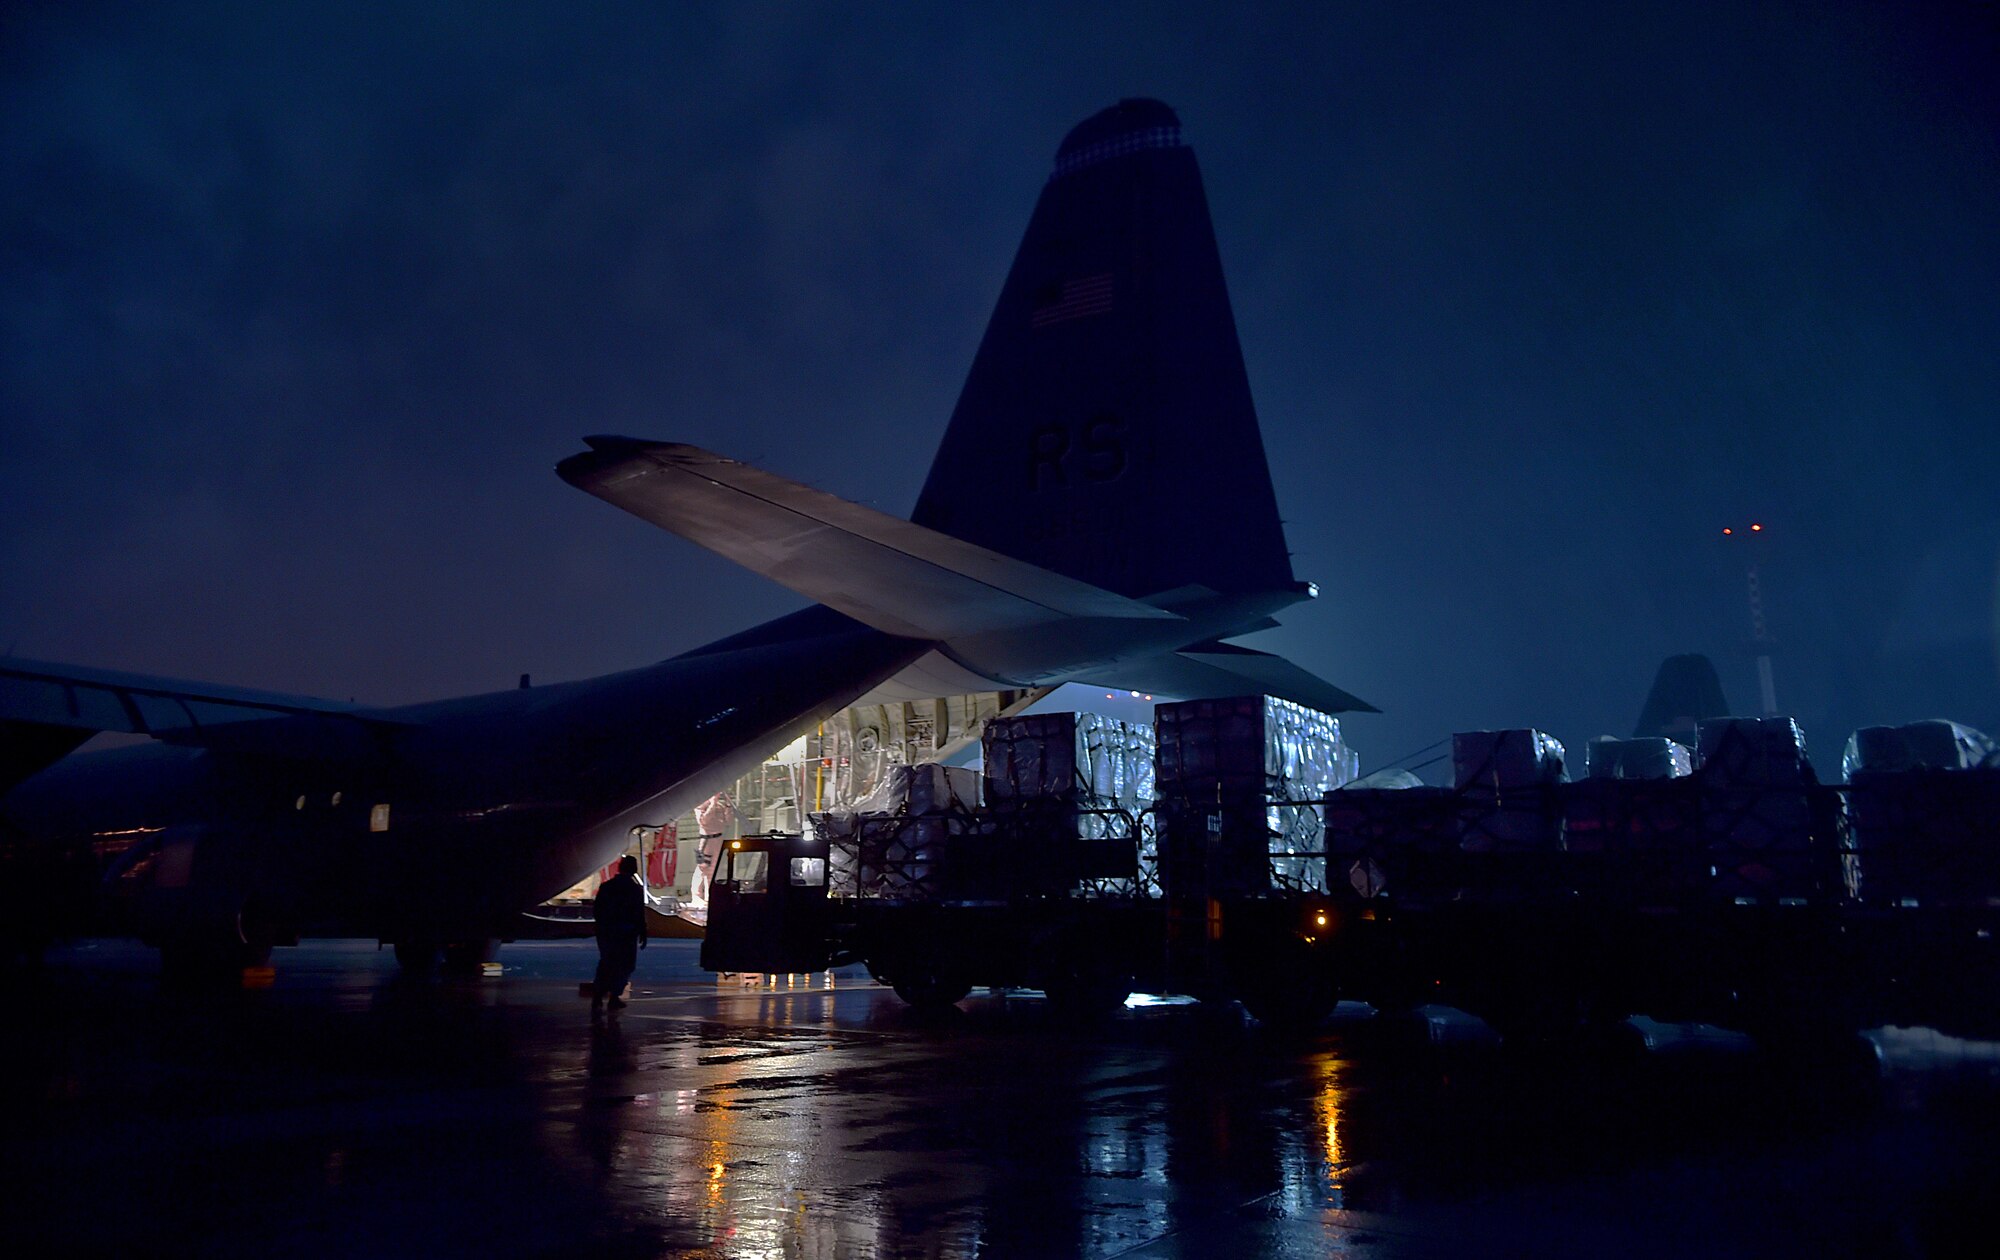 Cargo is loaded onto the ramp of a C-130-J Super Hercules, Oct. 7, 2014, at Ramstein Air Base, Germany. As the Ebola outbreak becomes a potential global threat, U.S. Africa Command is working in support of the U.S. Agency for International Development, the lead federal agency, as part of a comprehensive U.S. government effort to respond to and contain the outbreak of the Ebola virus in West Africa as quickly as possible. This was the first flight launched from Ramstein AB to Monrovia, Liberia in support of Operation United Assistance. (U.S. Air Force photo/Staff Sgt. Sara Keller)